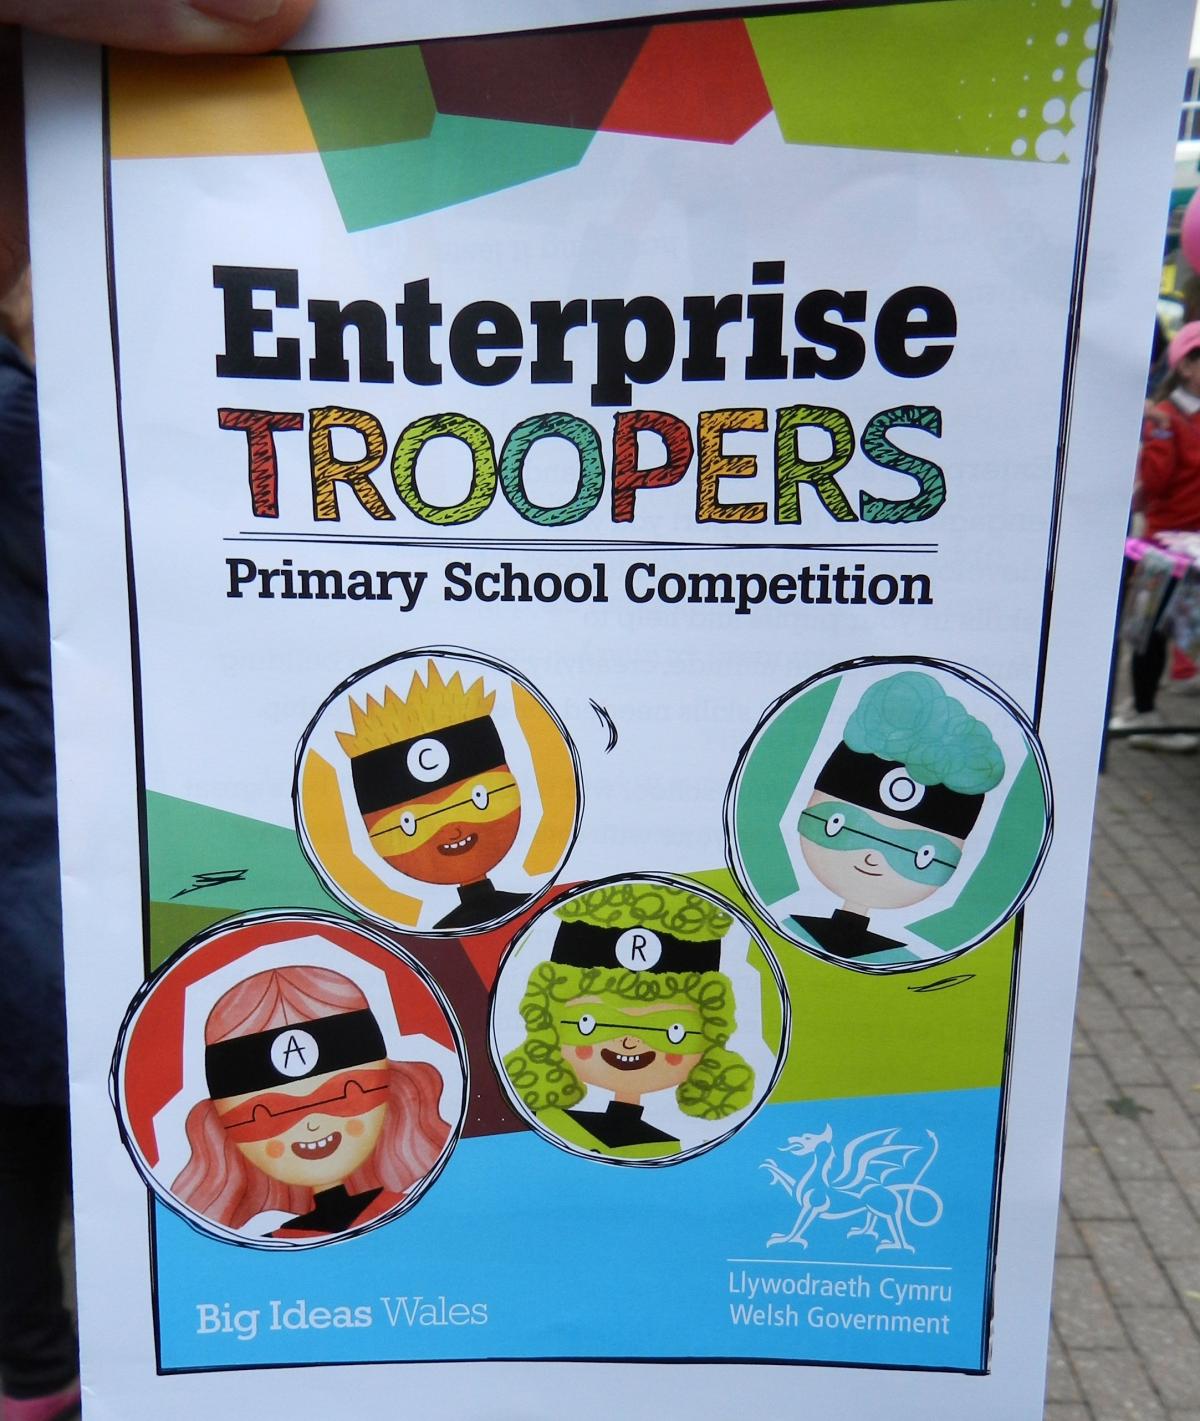 The 'Enterprise Troopers' were in Haverfordwest to inspire pupils